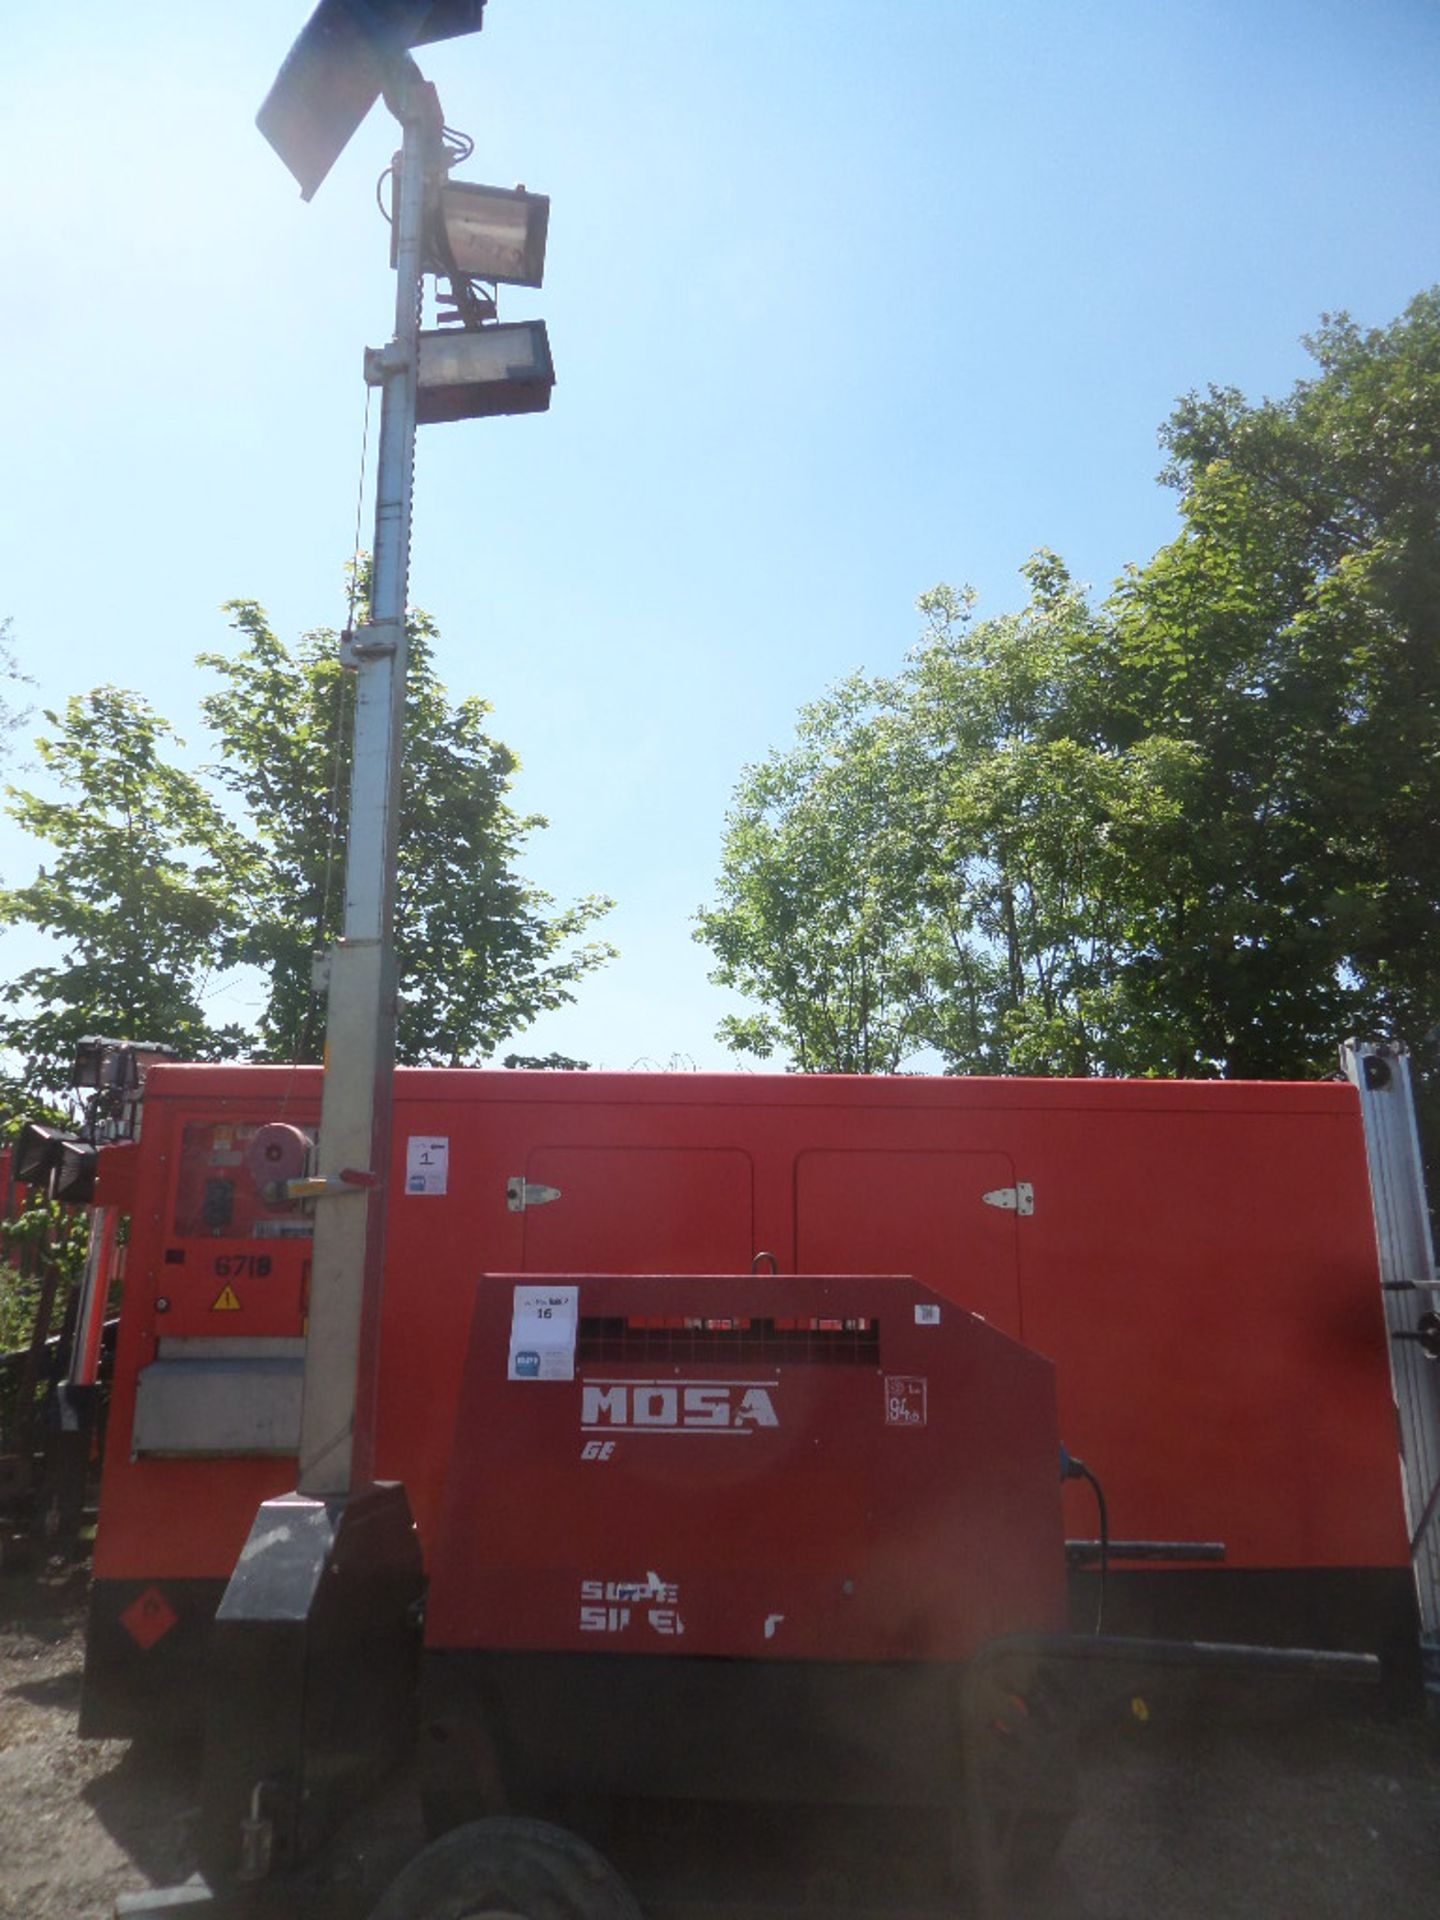 MOSA GE 6000 SX/GS {027615} LIGHTING TOWER/ 6KVA DIESEL GENERATOR SUPER SILENCED Comes with 110v 16a - Image 4 of 4